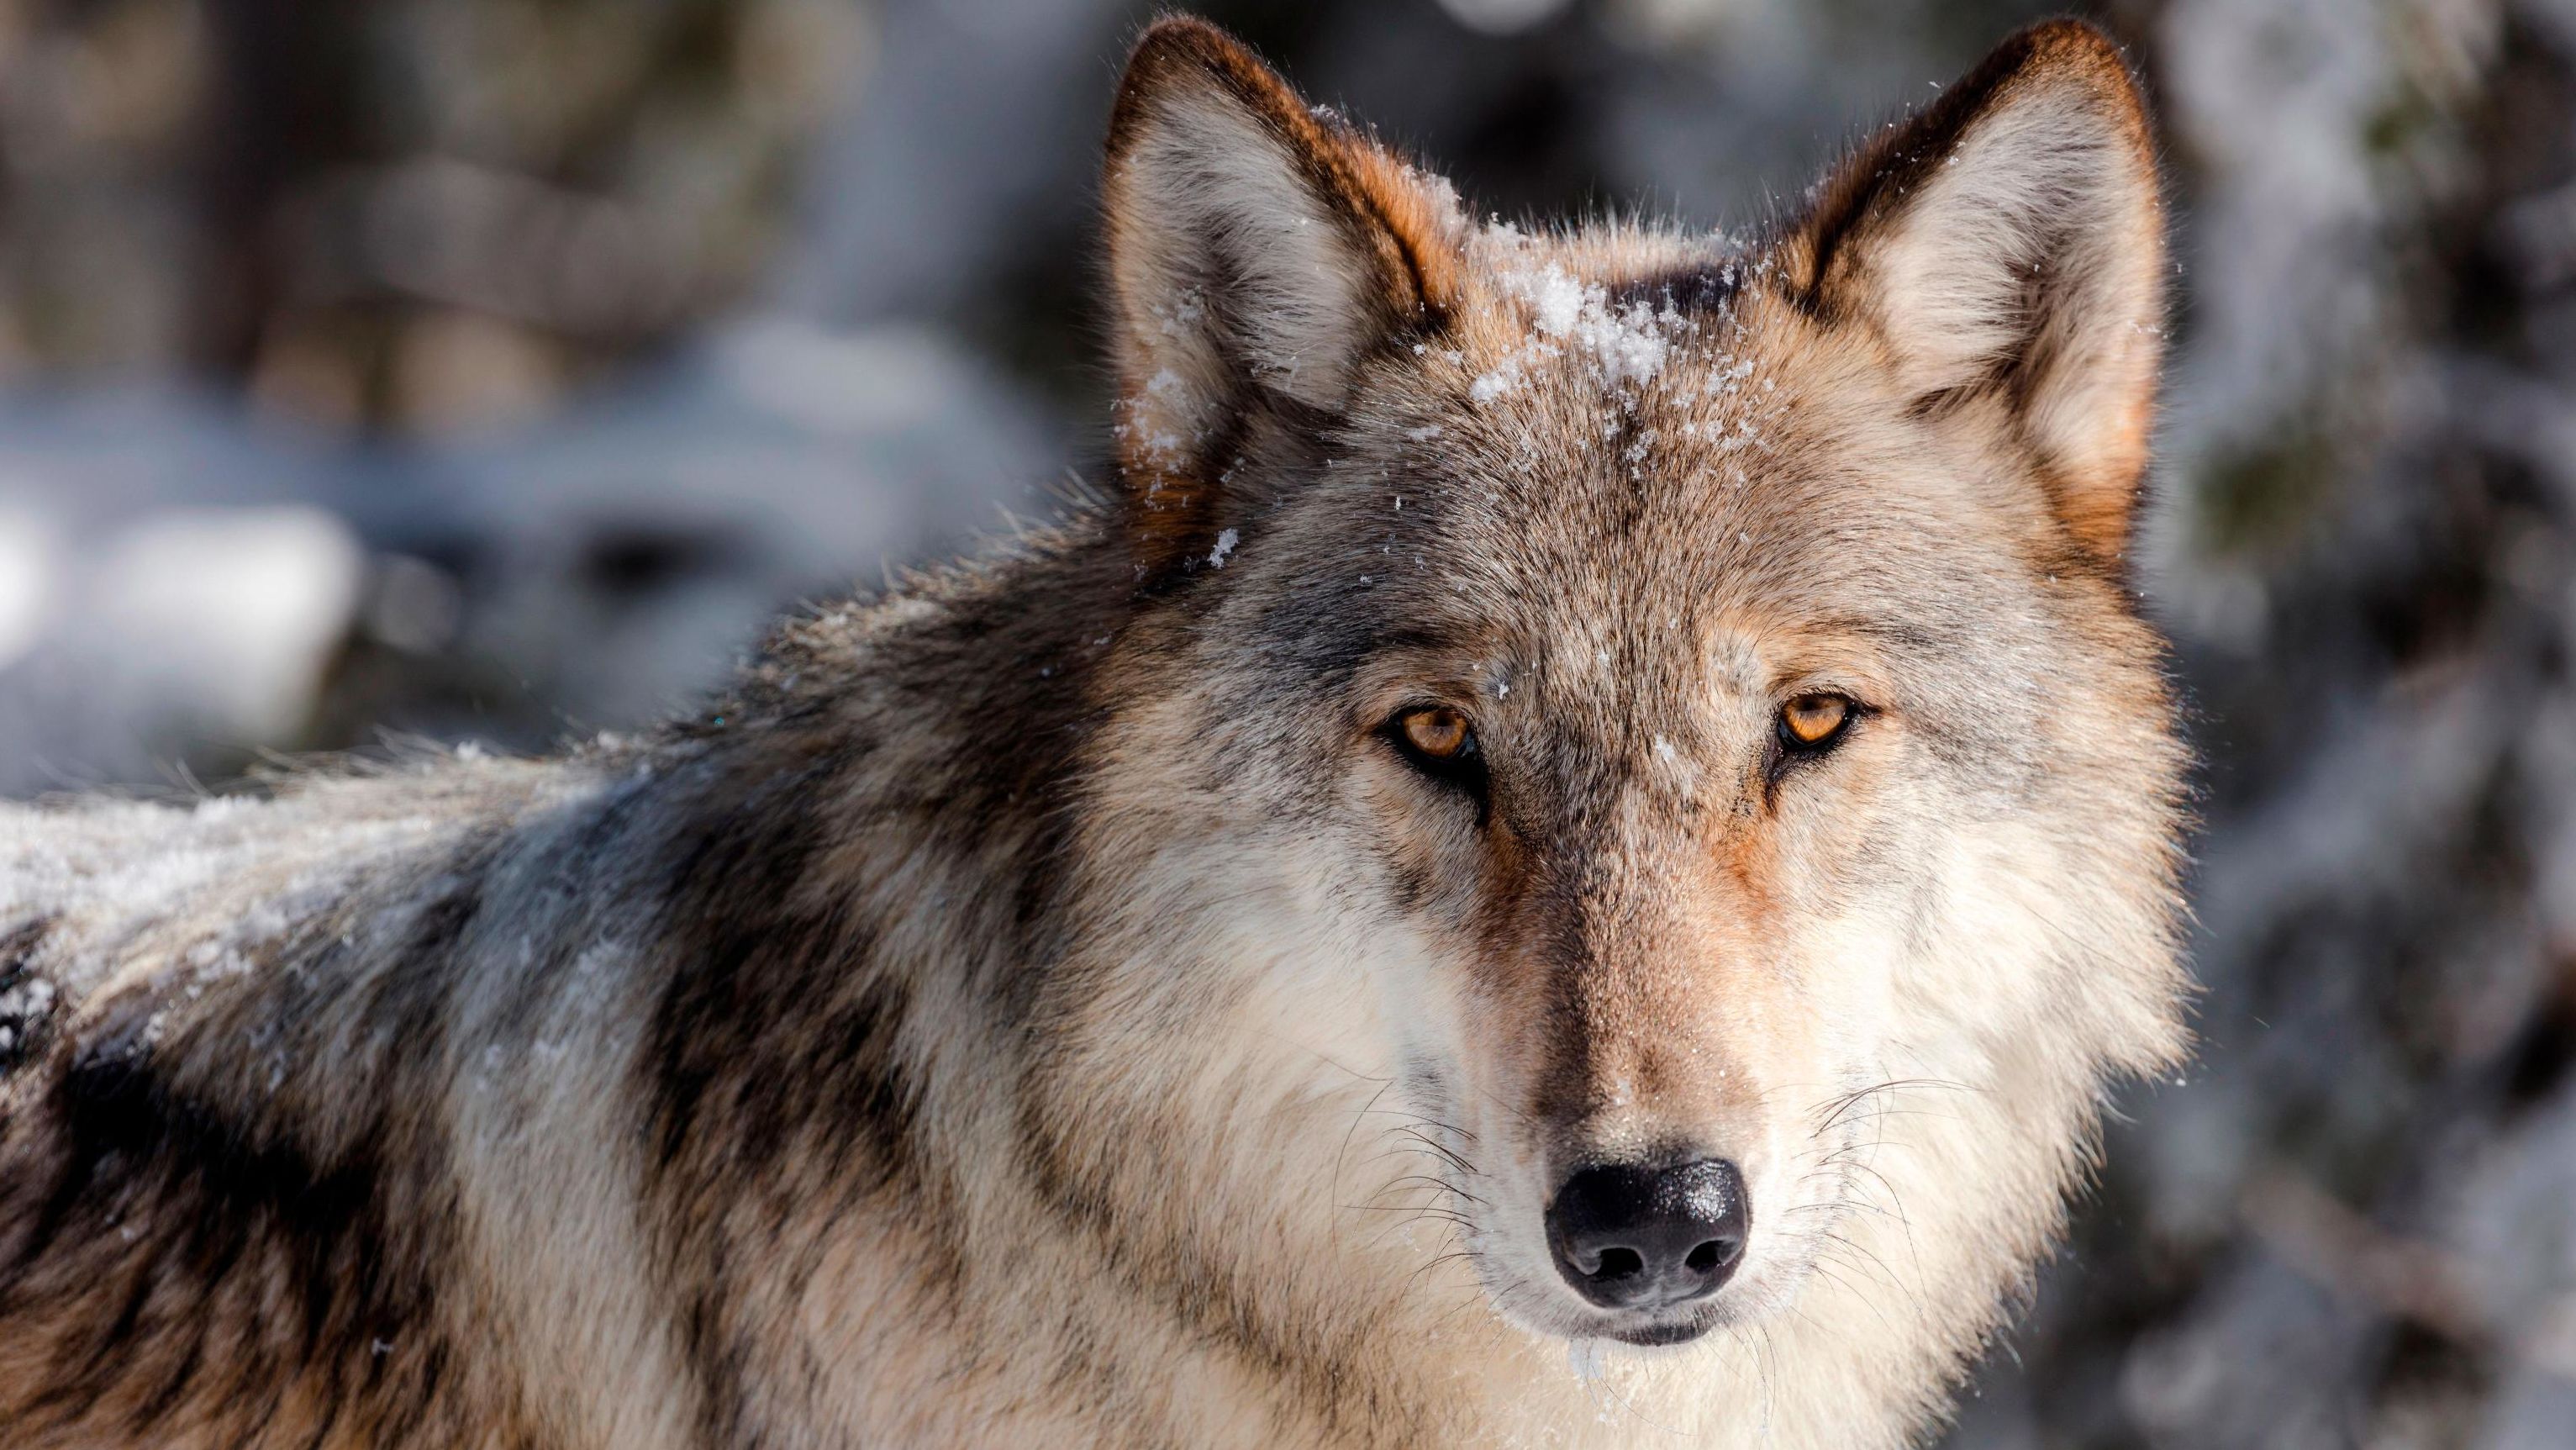 Researchers proposed a massive network of protected federal land be set aside for gray wolves across 11 Western states. 